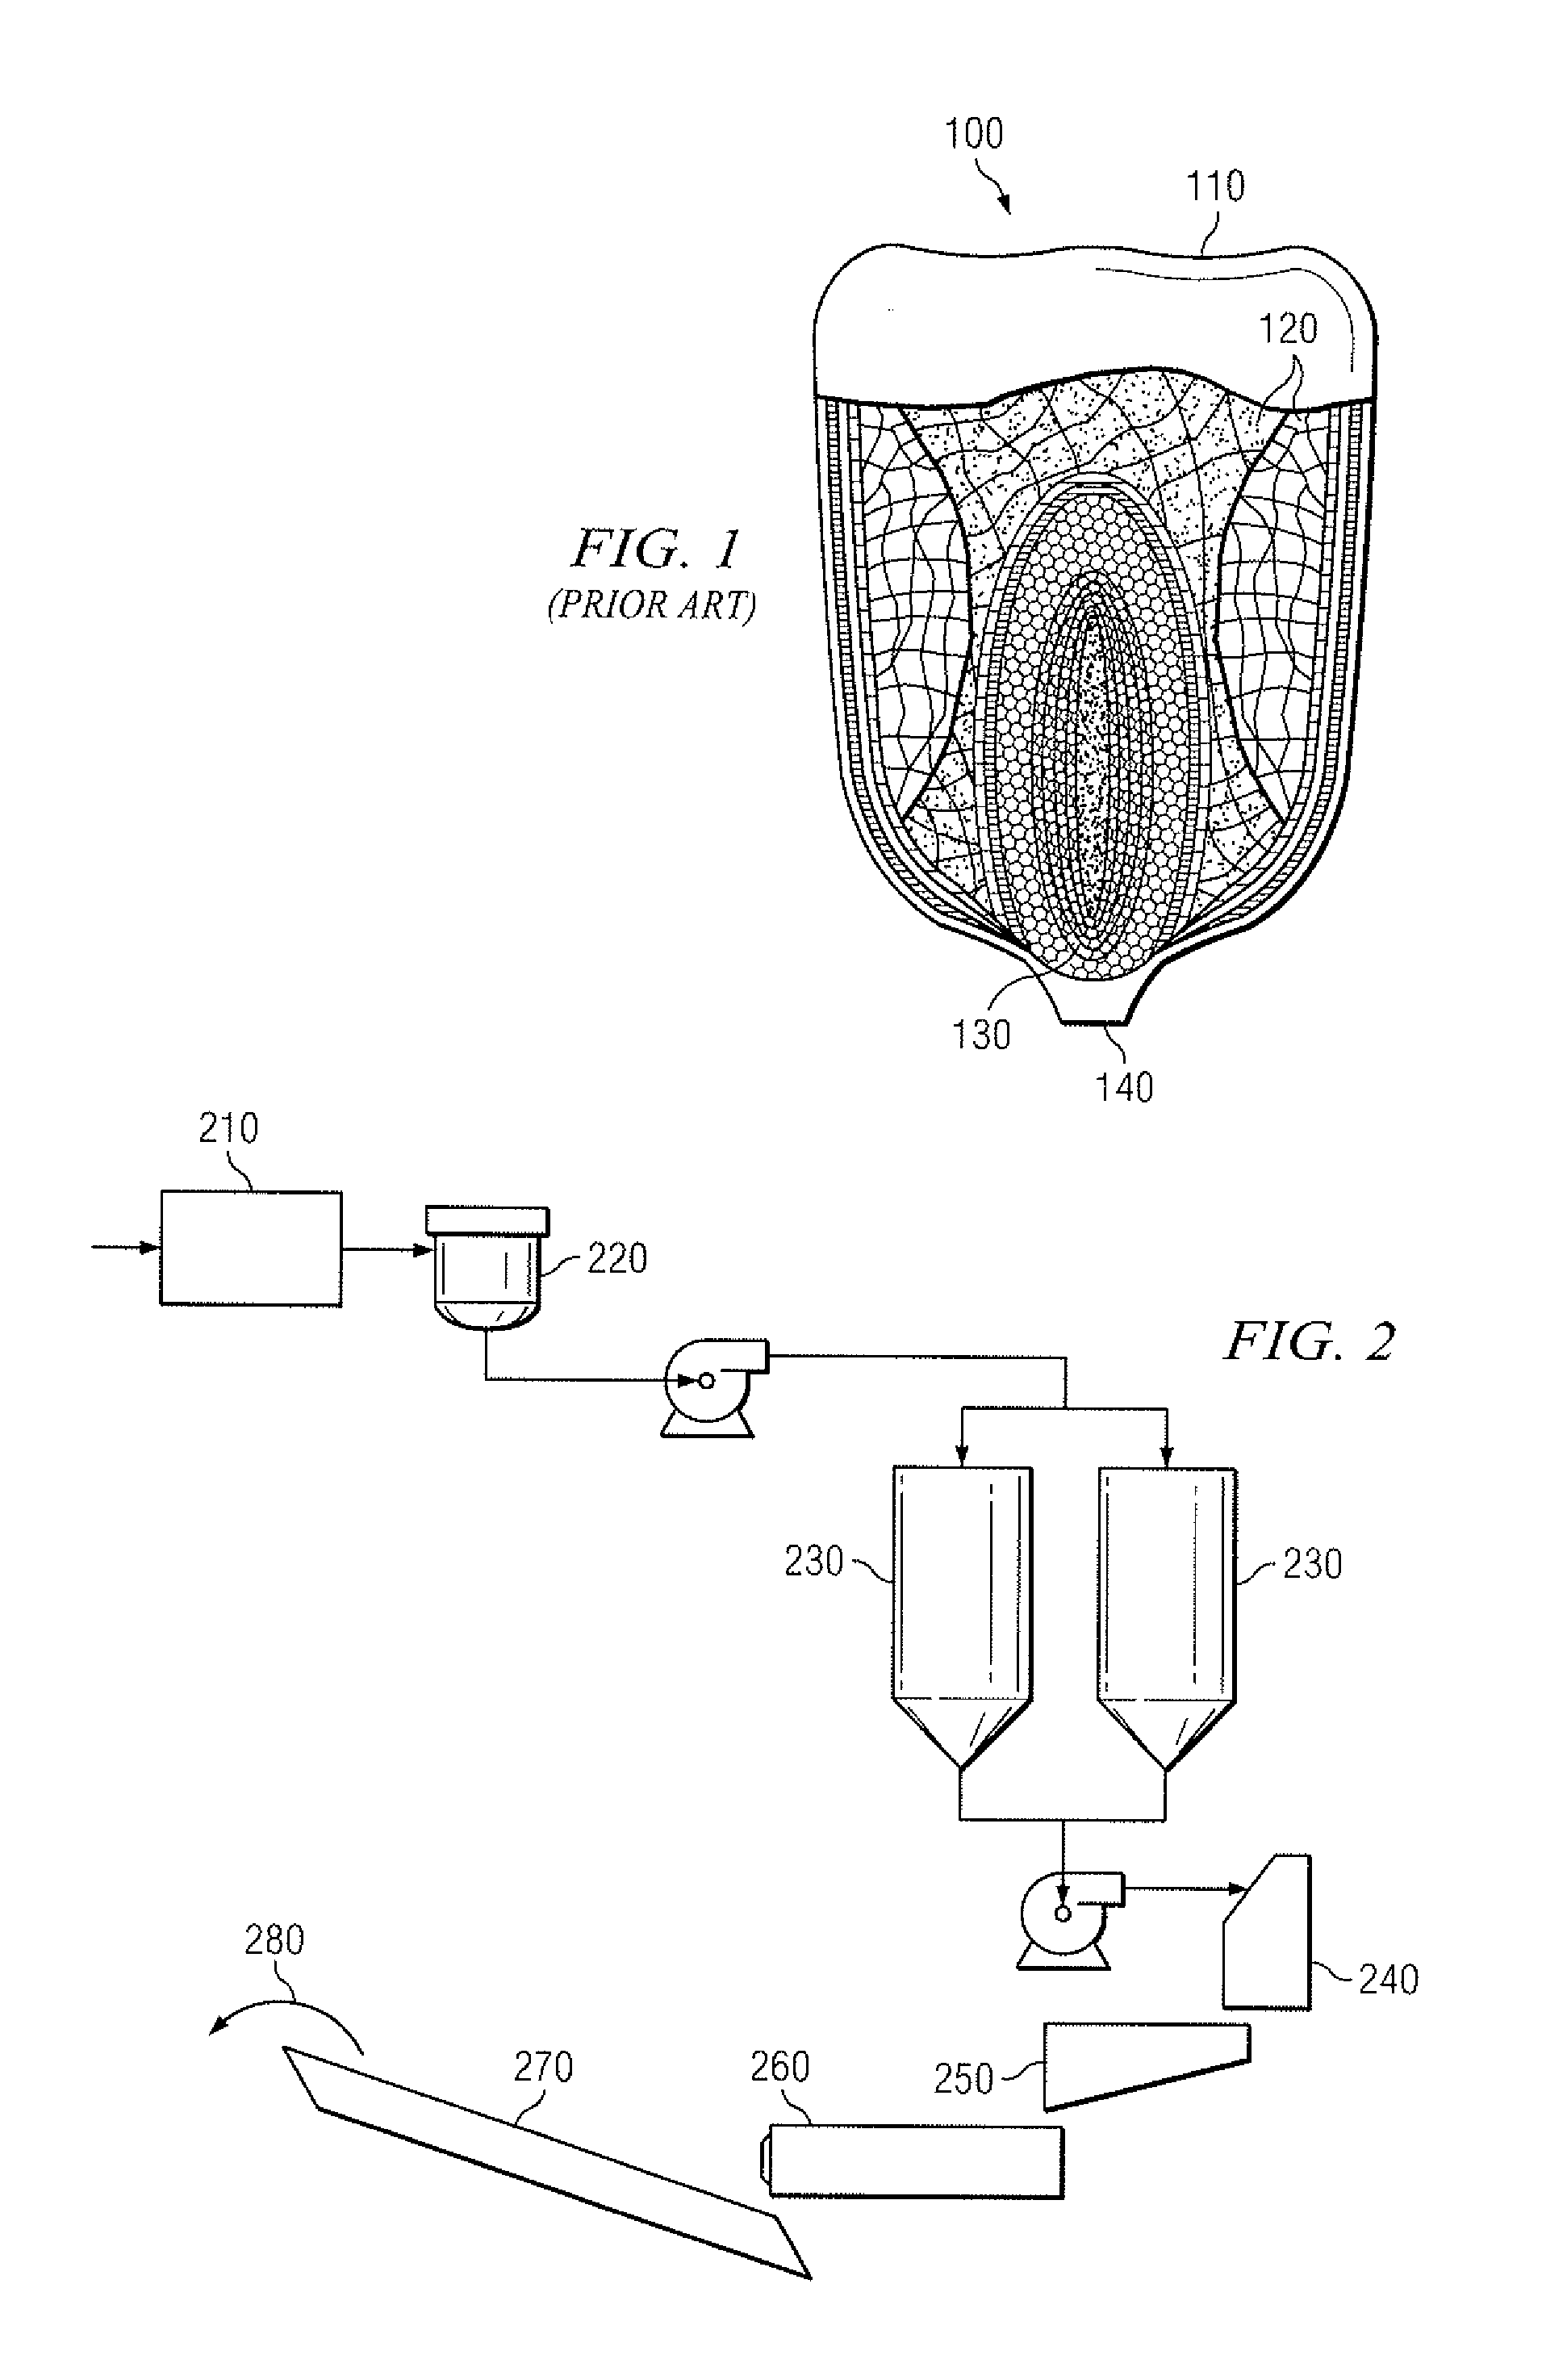 Process for Neutralizing Enzymes in Corn